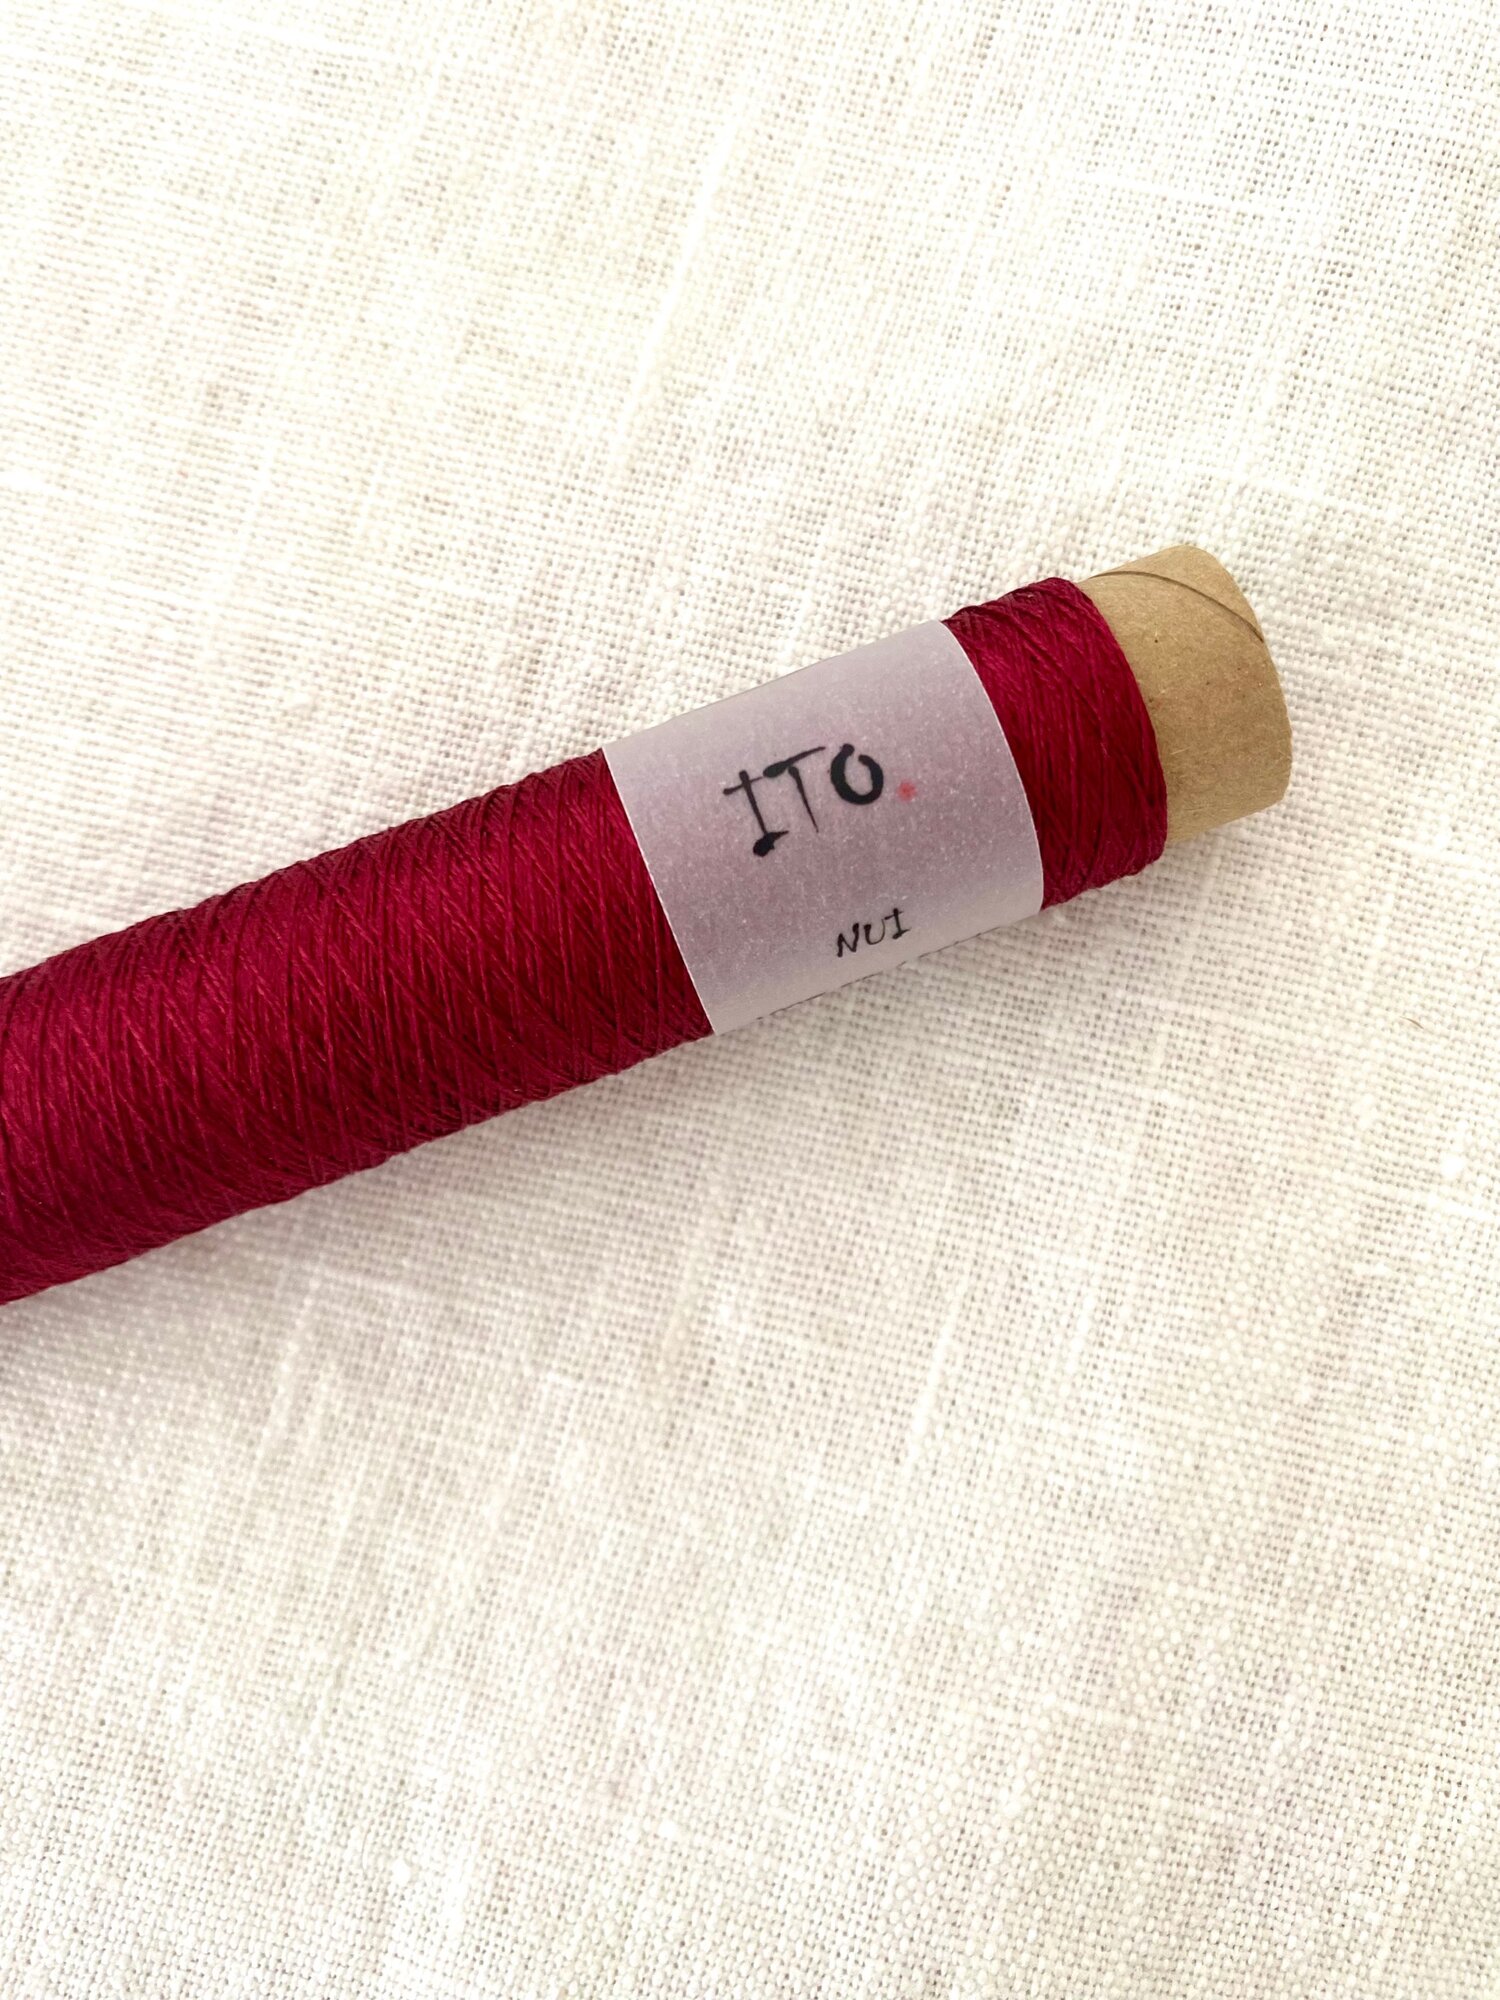 Ito Nui Silk Embroidery Thread — Judith & Lily